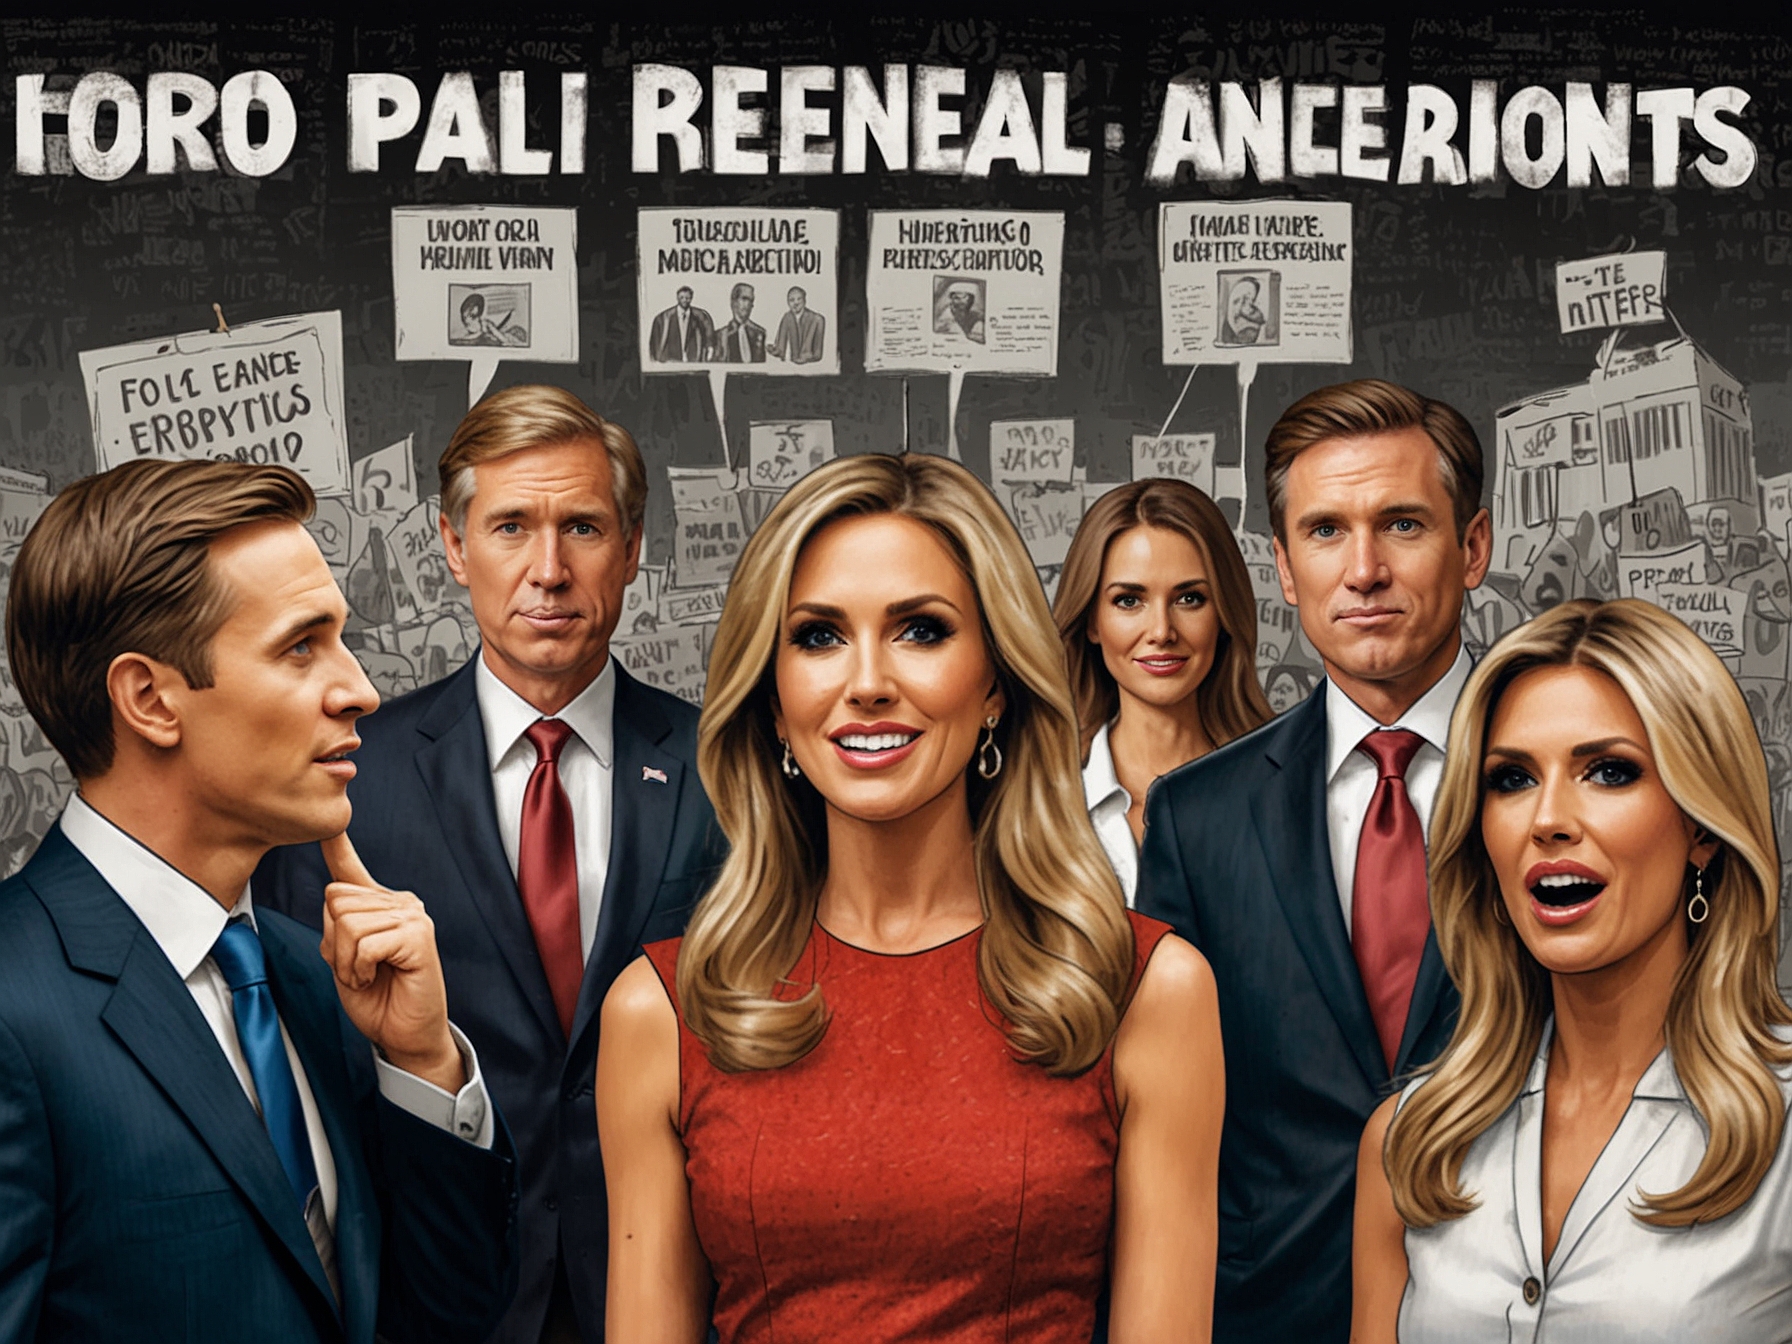 A montage depicting social media reactions and headlines from various fact-checking articles debunking Lara Trump's statements about employment rates, economic growth, and foreign policy.